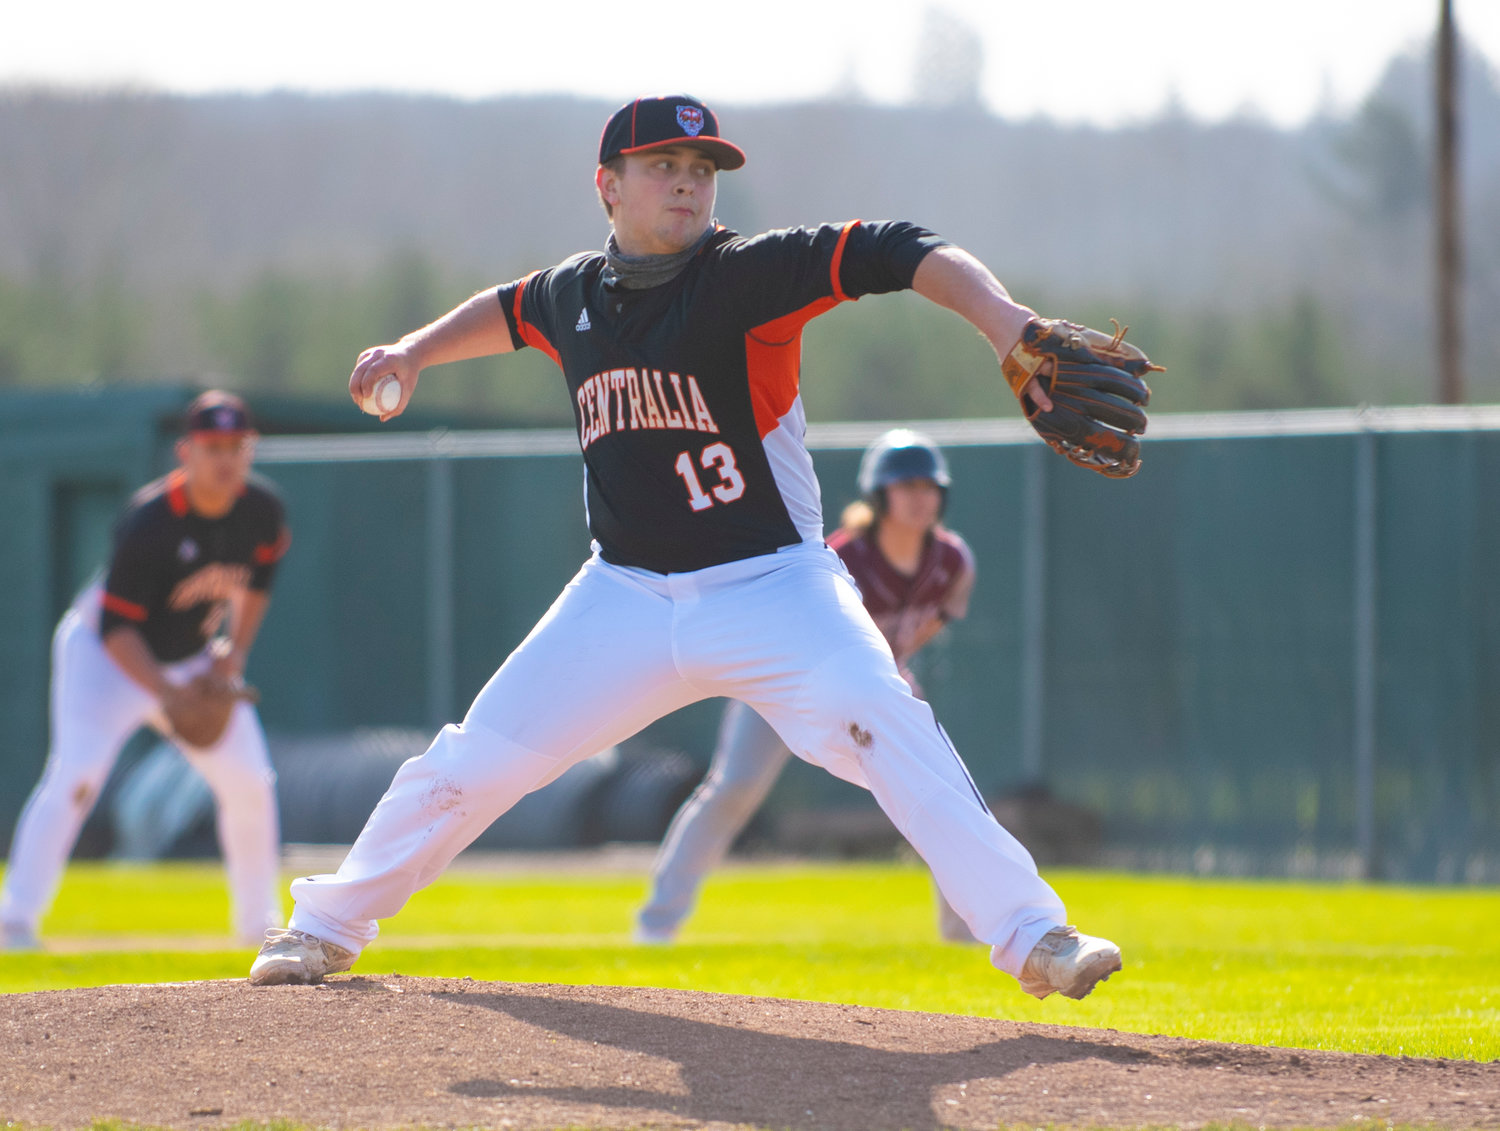 Centralia senior Cameron Erickson delivers a pitch to Montesano during the Tigers' season opener at home Monday.